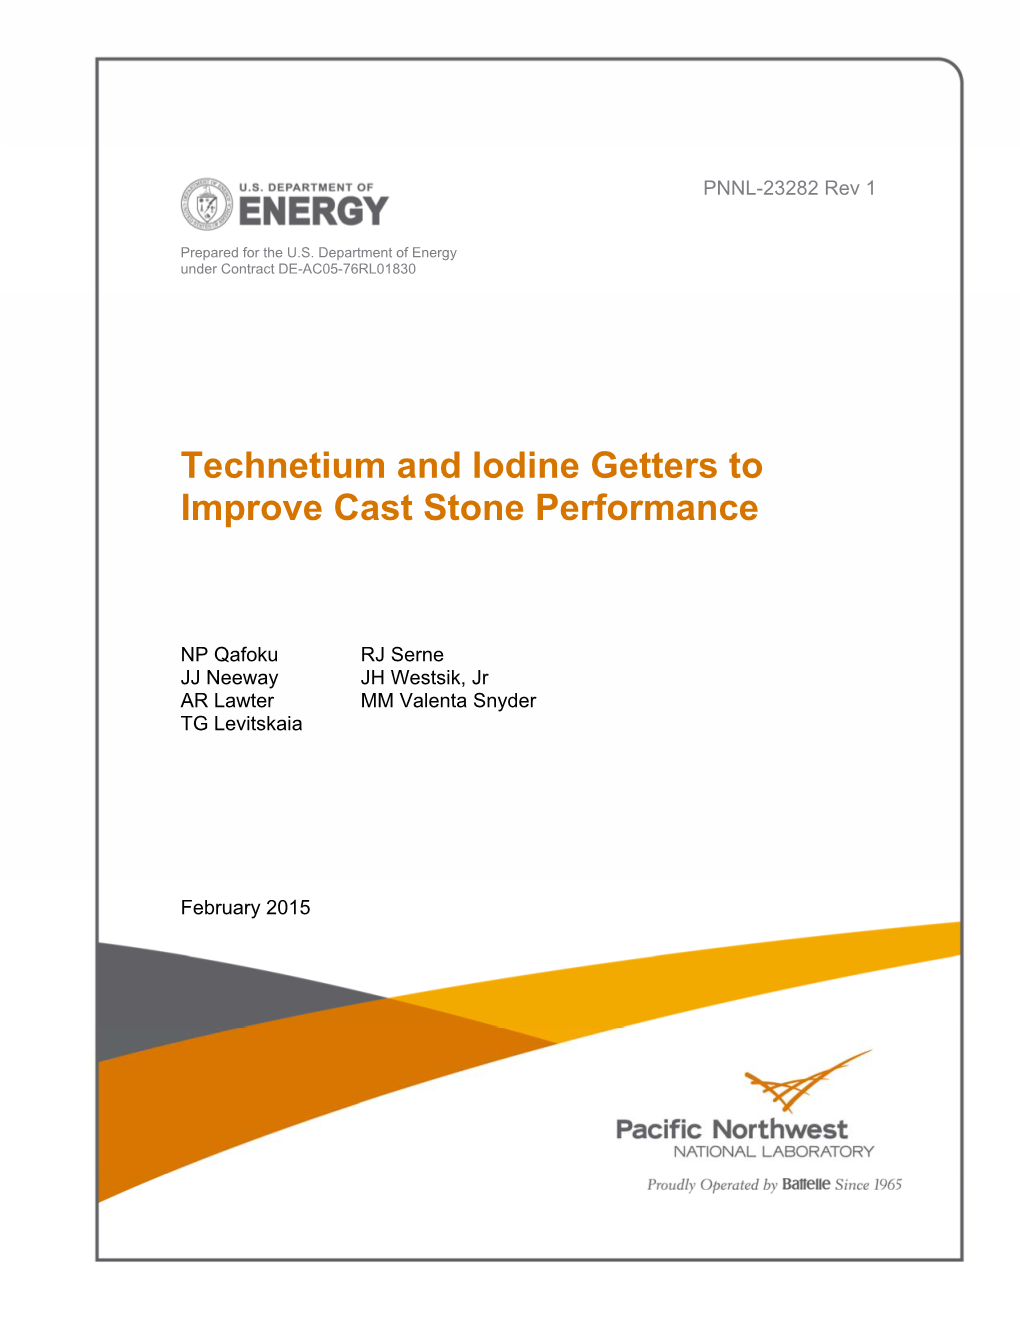 Technetium and Iodine Getters to Improve Cast Stone Performance